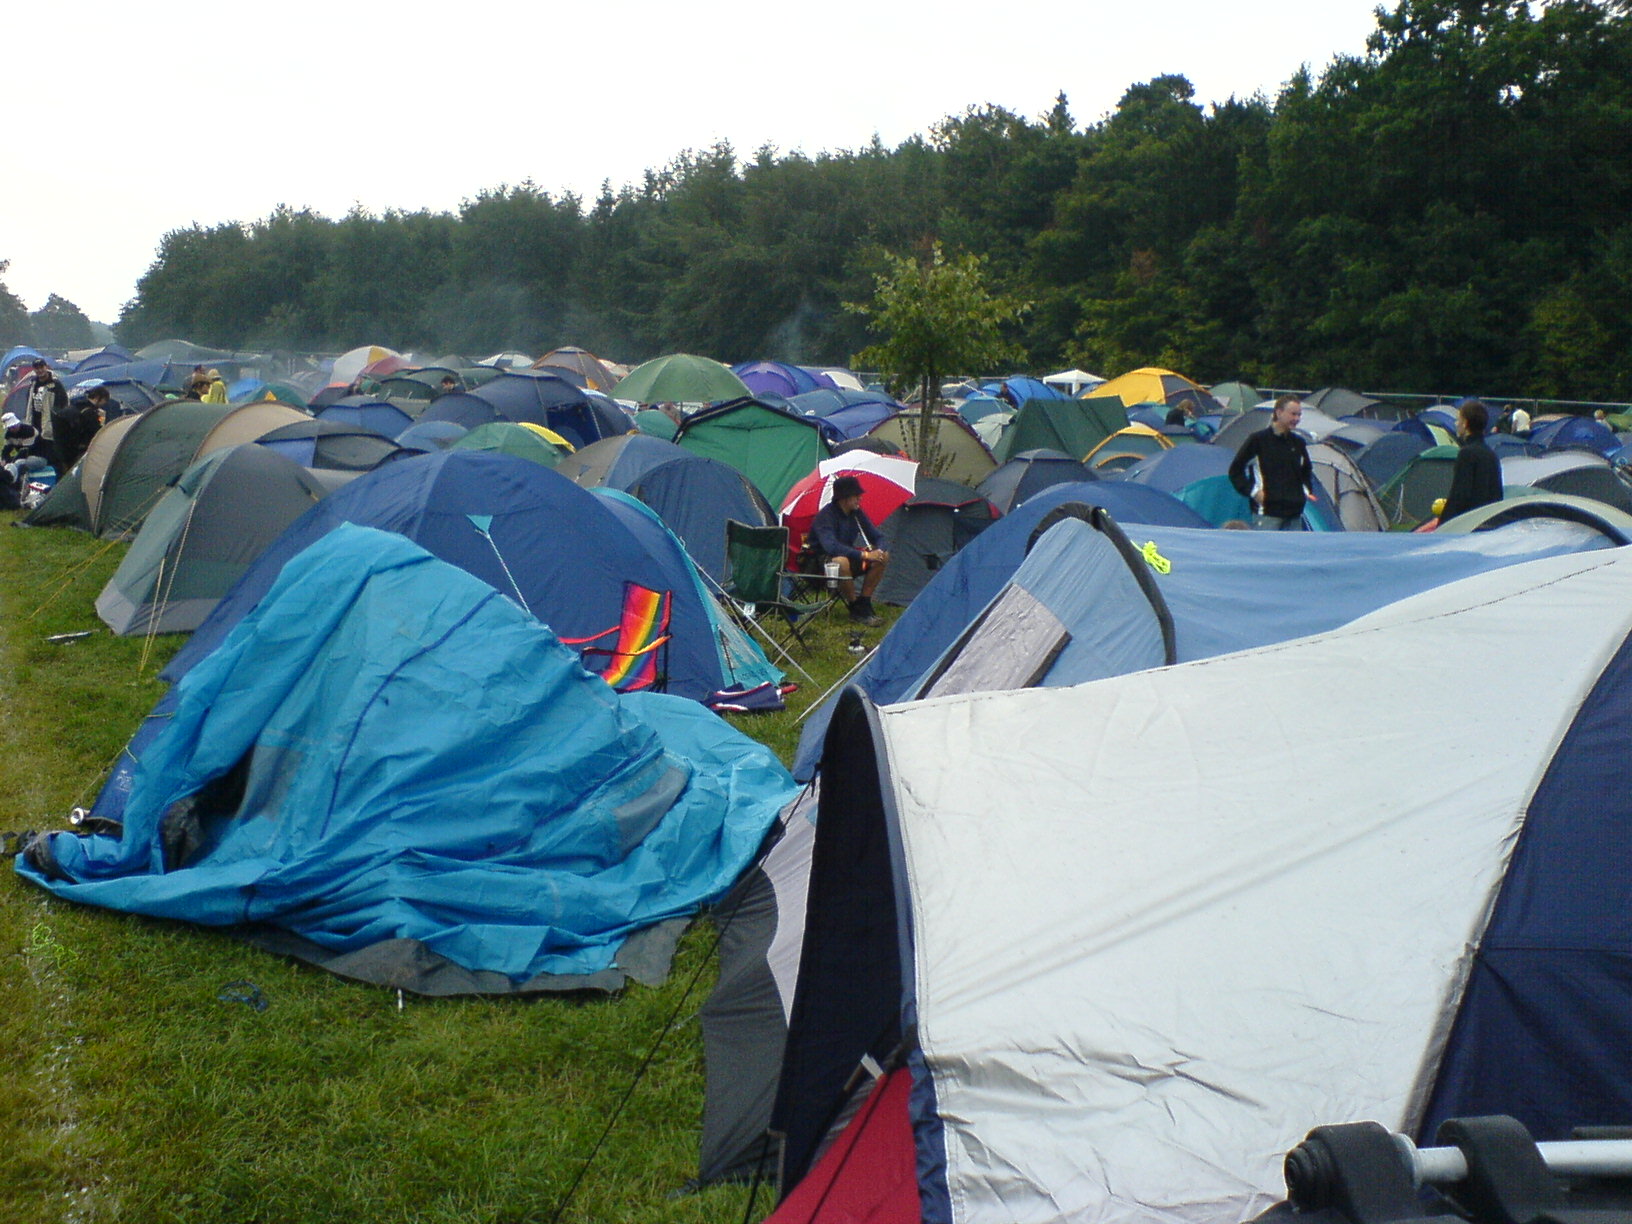 a lot of tents and people next to trees